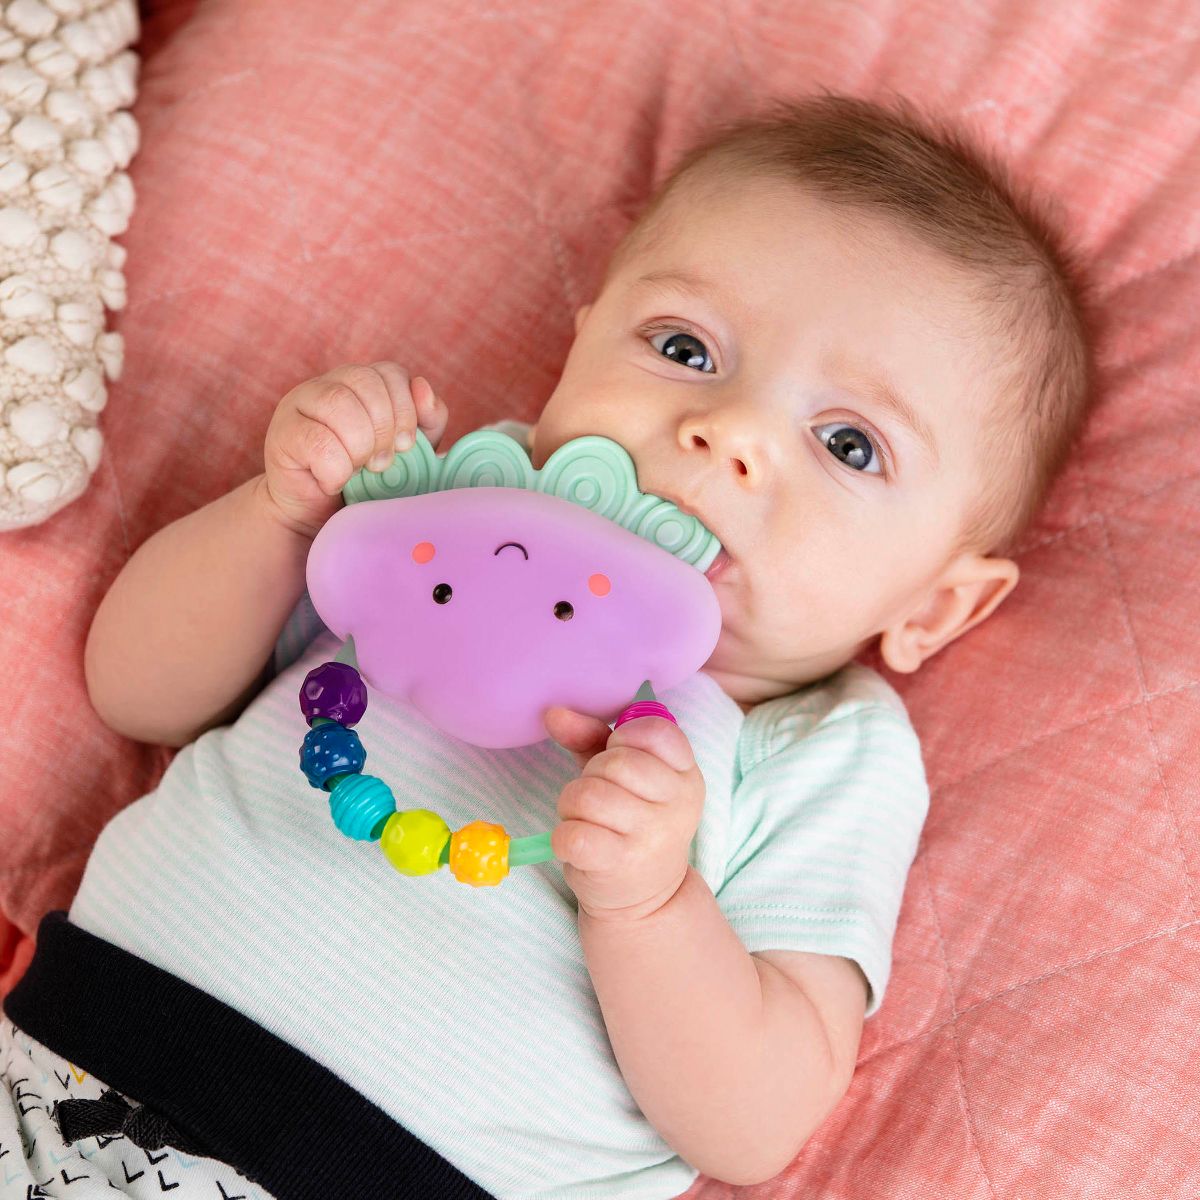 Light-up baby cloud rattle